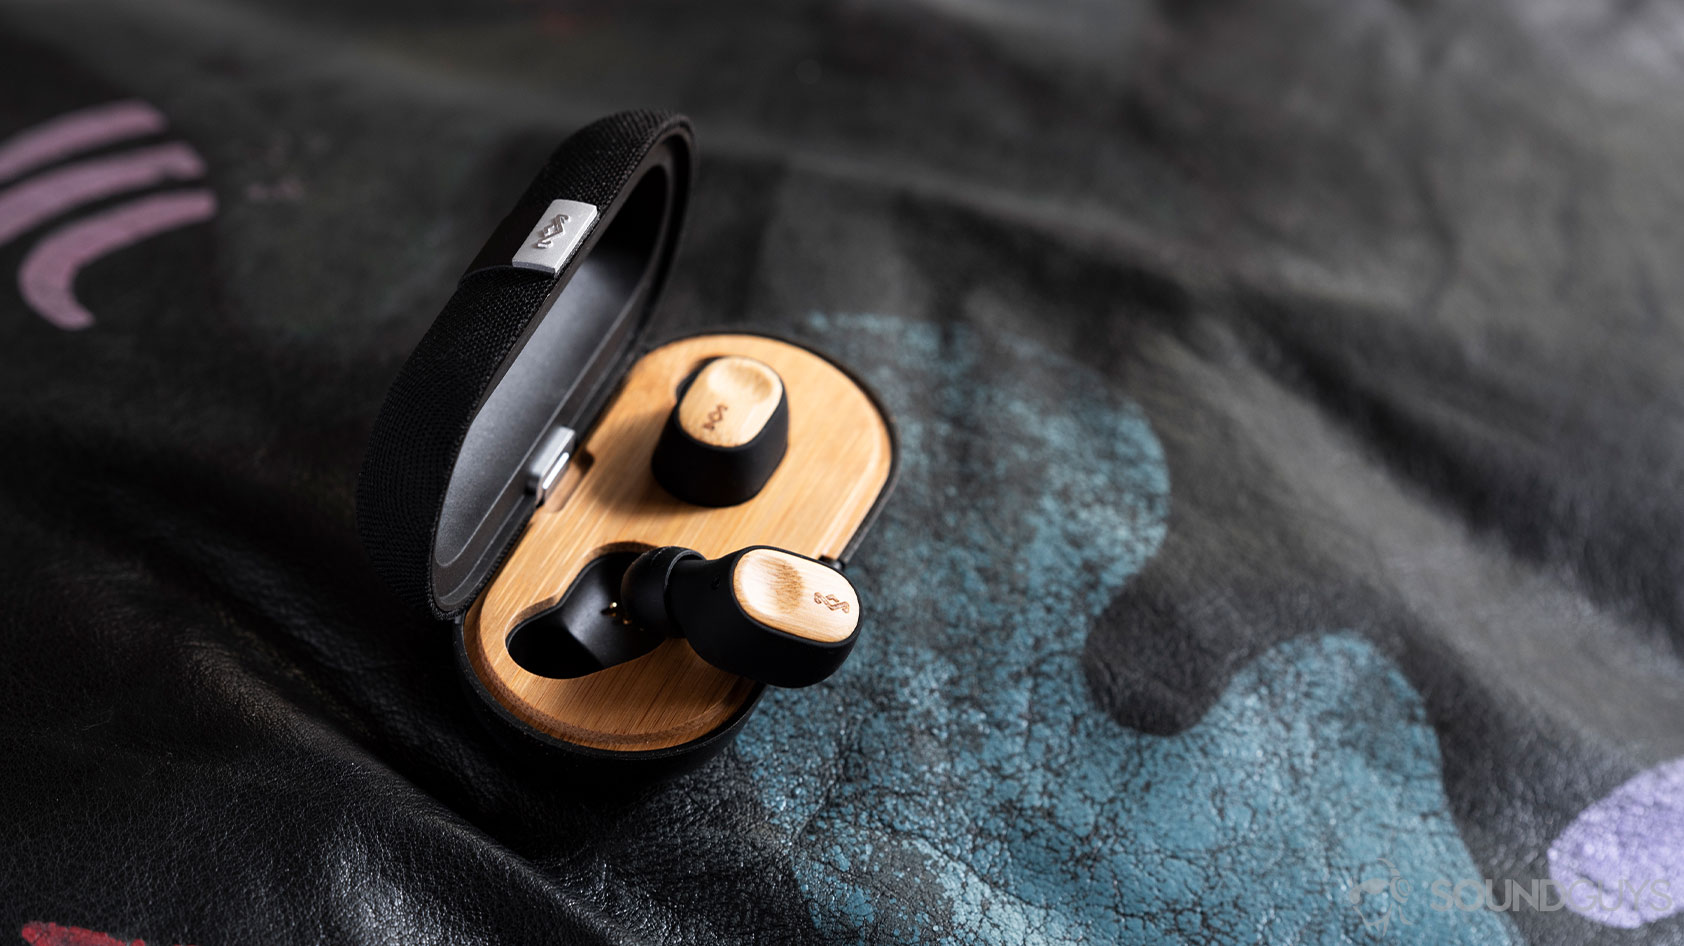 House of Marley Liberate Air true wireless earbuds with on earbud in the case and the other on top.